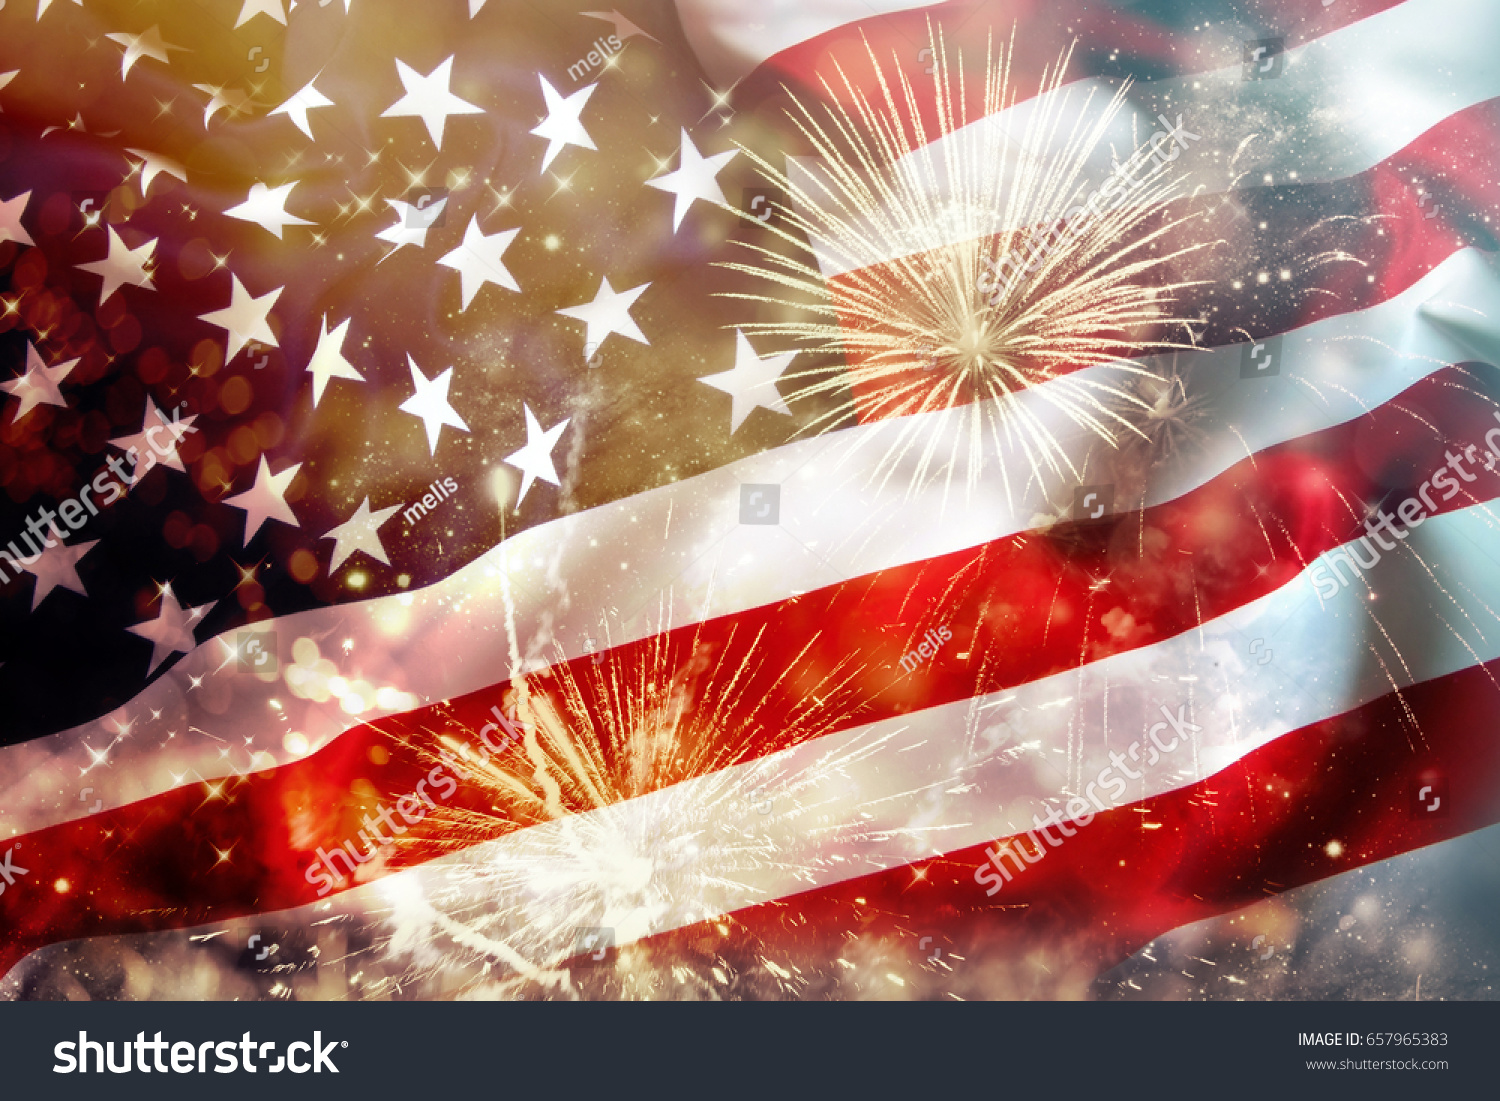 Celebrating Independence Day. United States of America USA flag with fireworks background for 4th of July #657965383